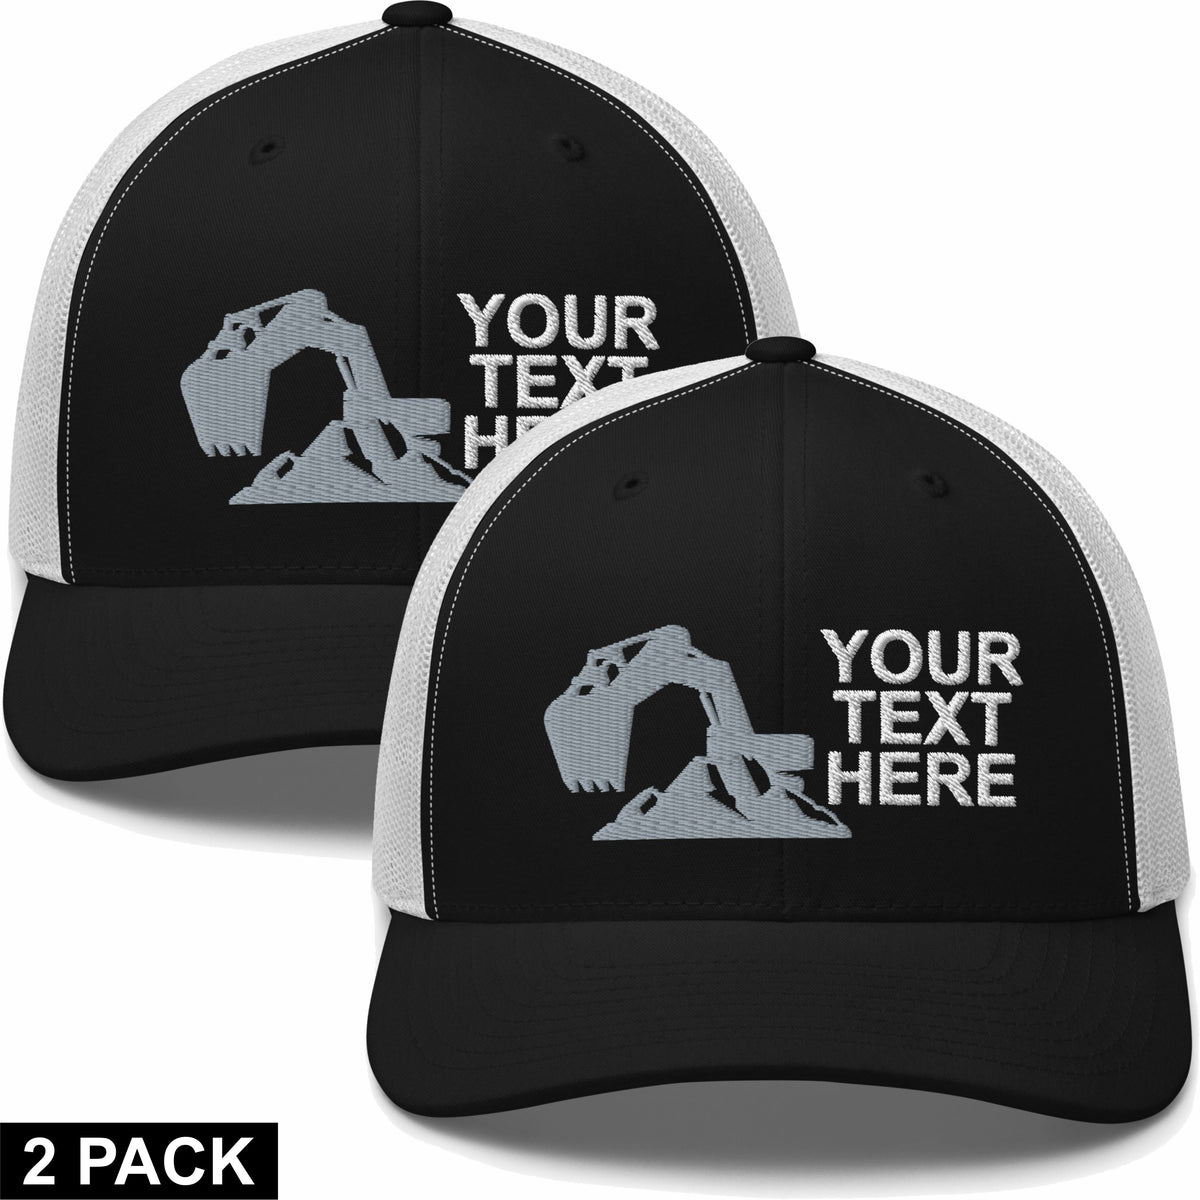 2 Embroidered Hats - Excavator - Your Text Here - Free Shipping